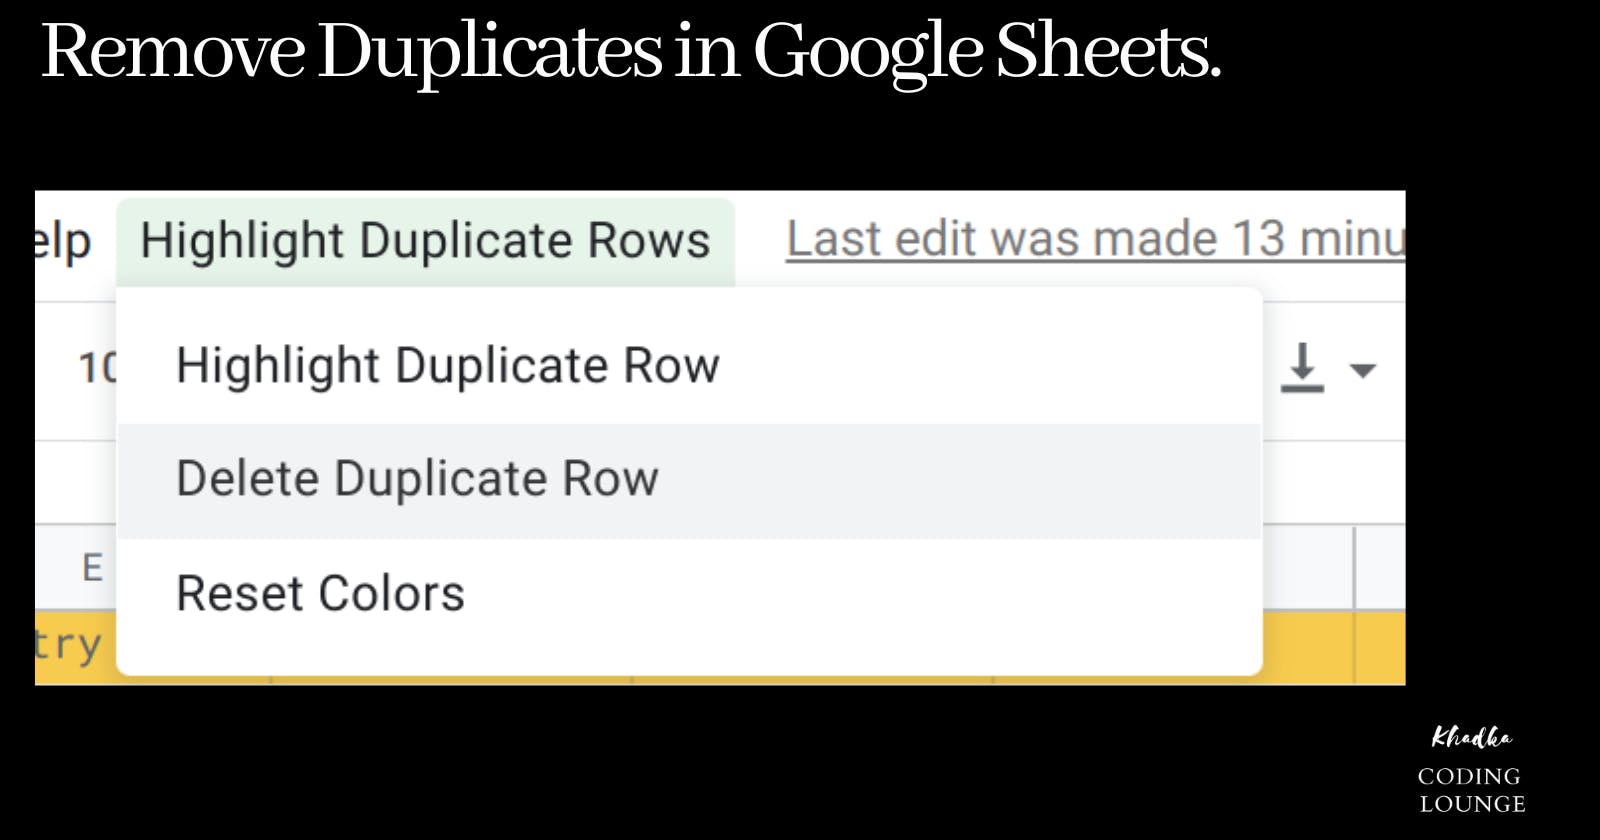 Removing Duplicates in Google Sheets: A Guide for Non-coders